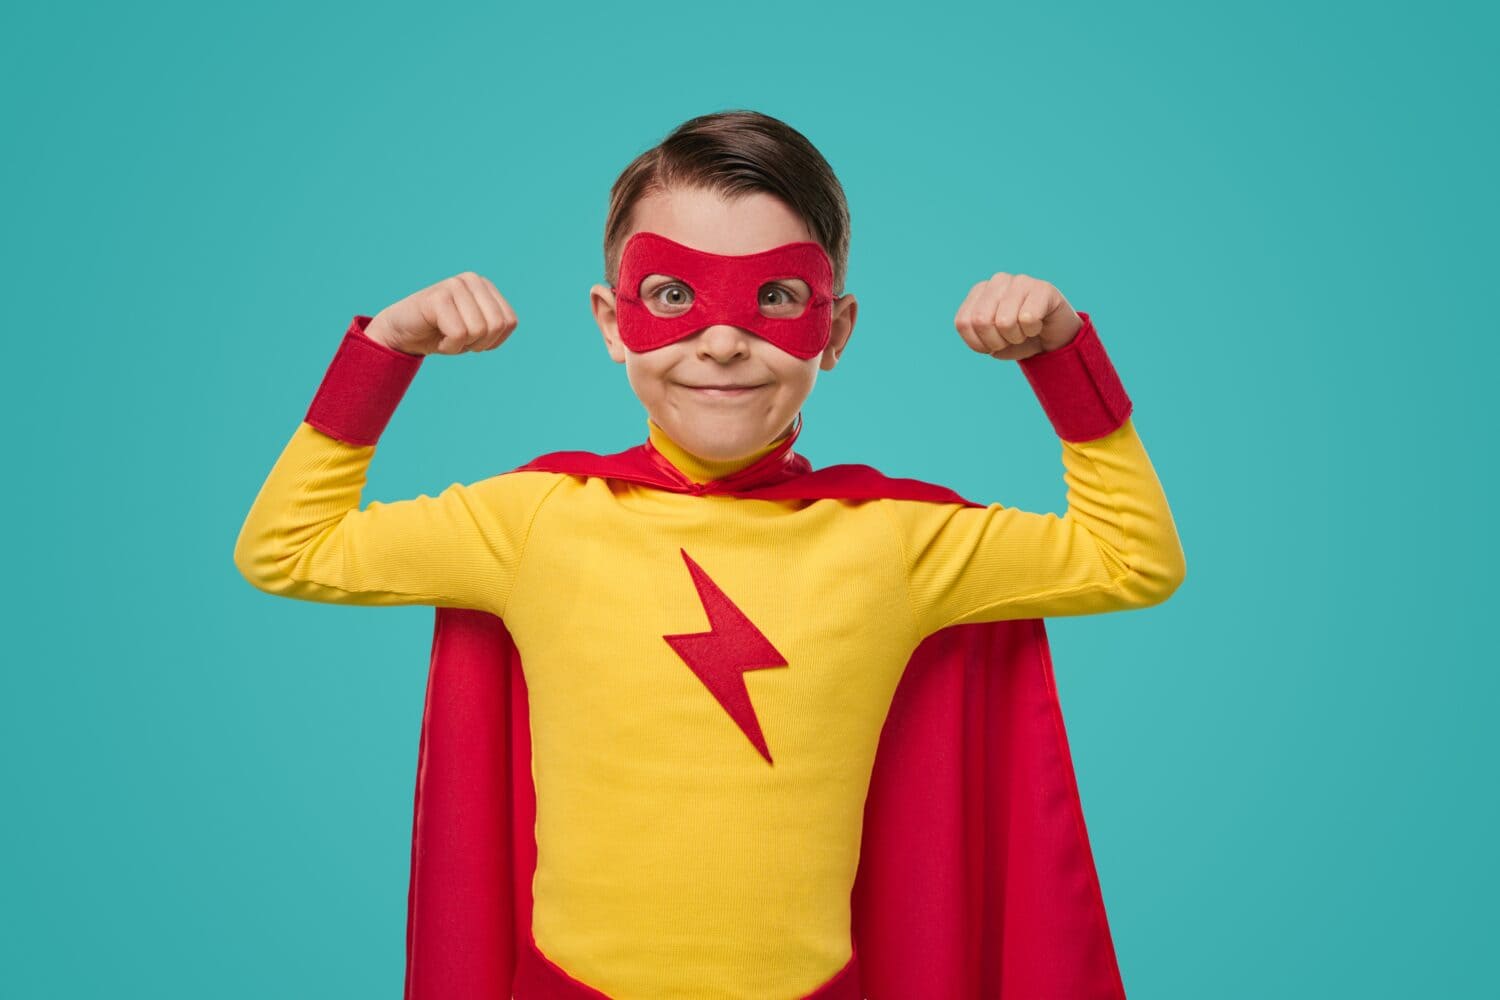 Content superhero kid in red and yellow cape and mask demonstrating power while looking at camera against blue background in studio